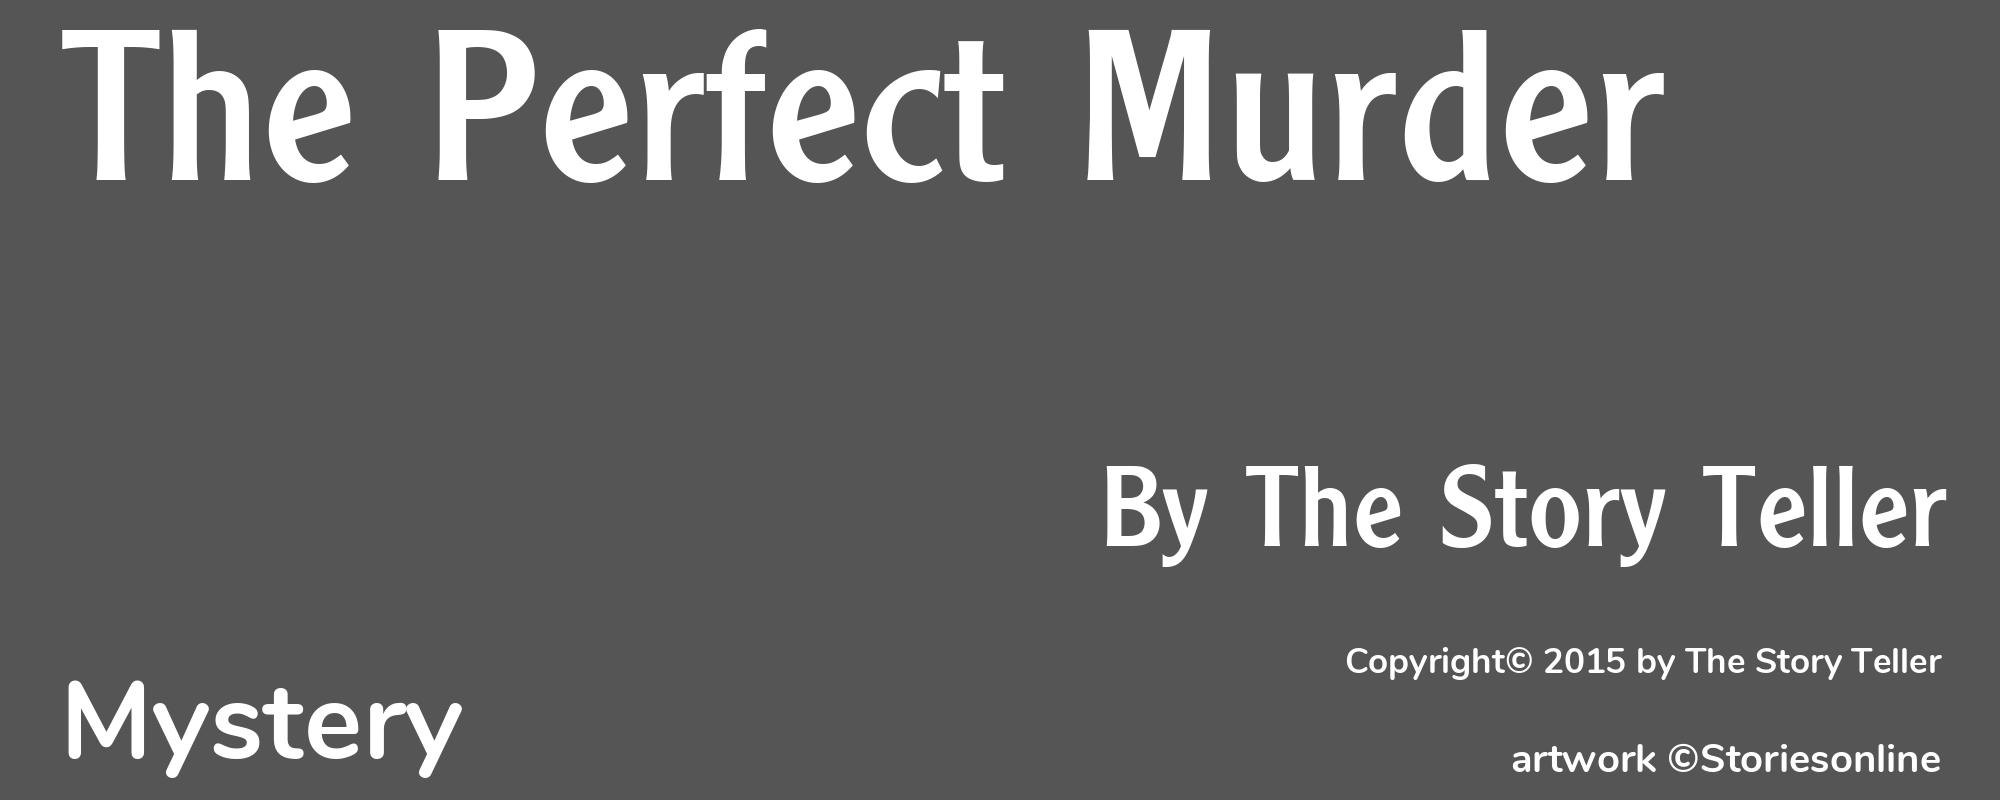 The Perfect Murder - Cover